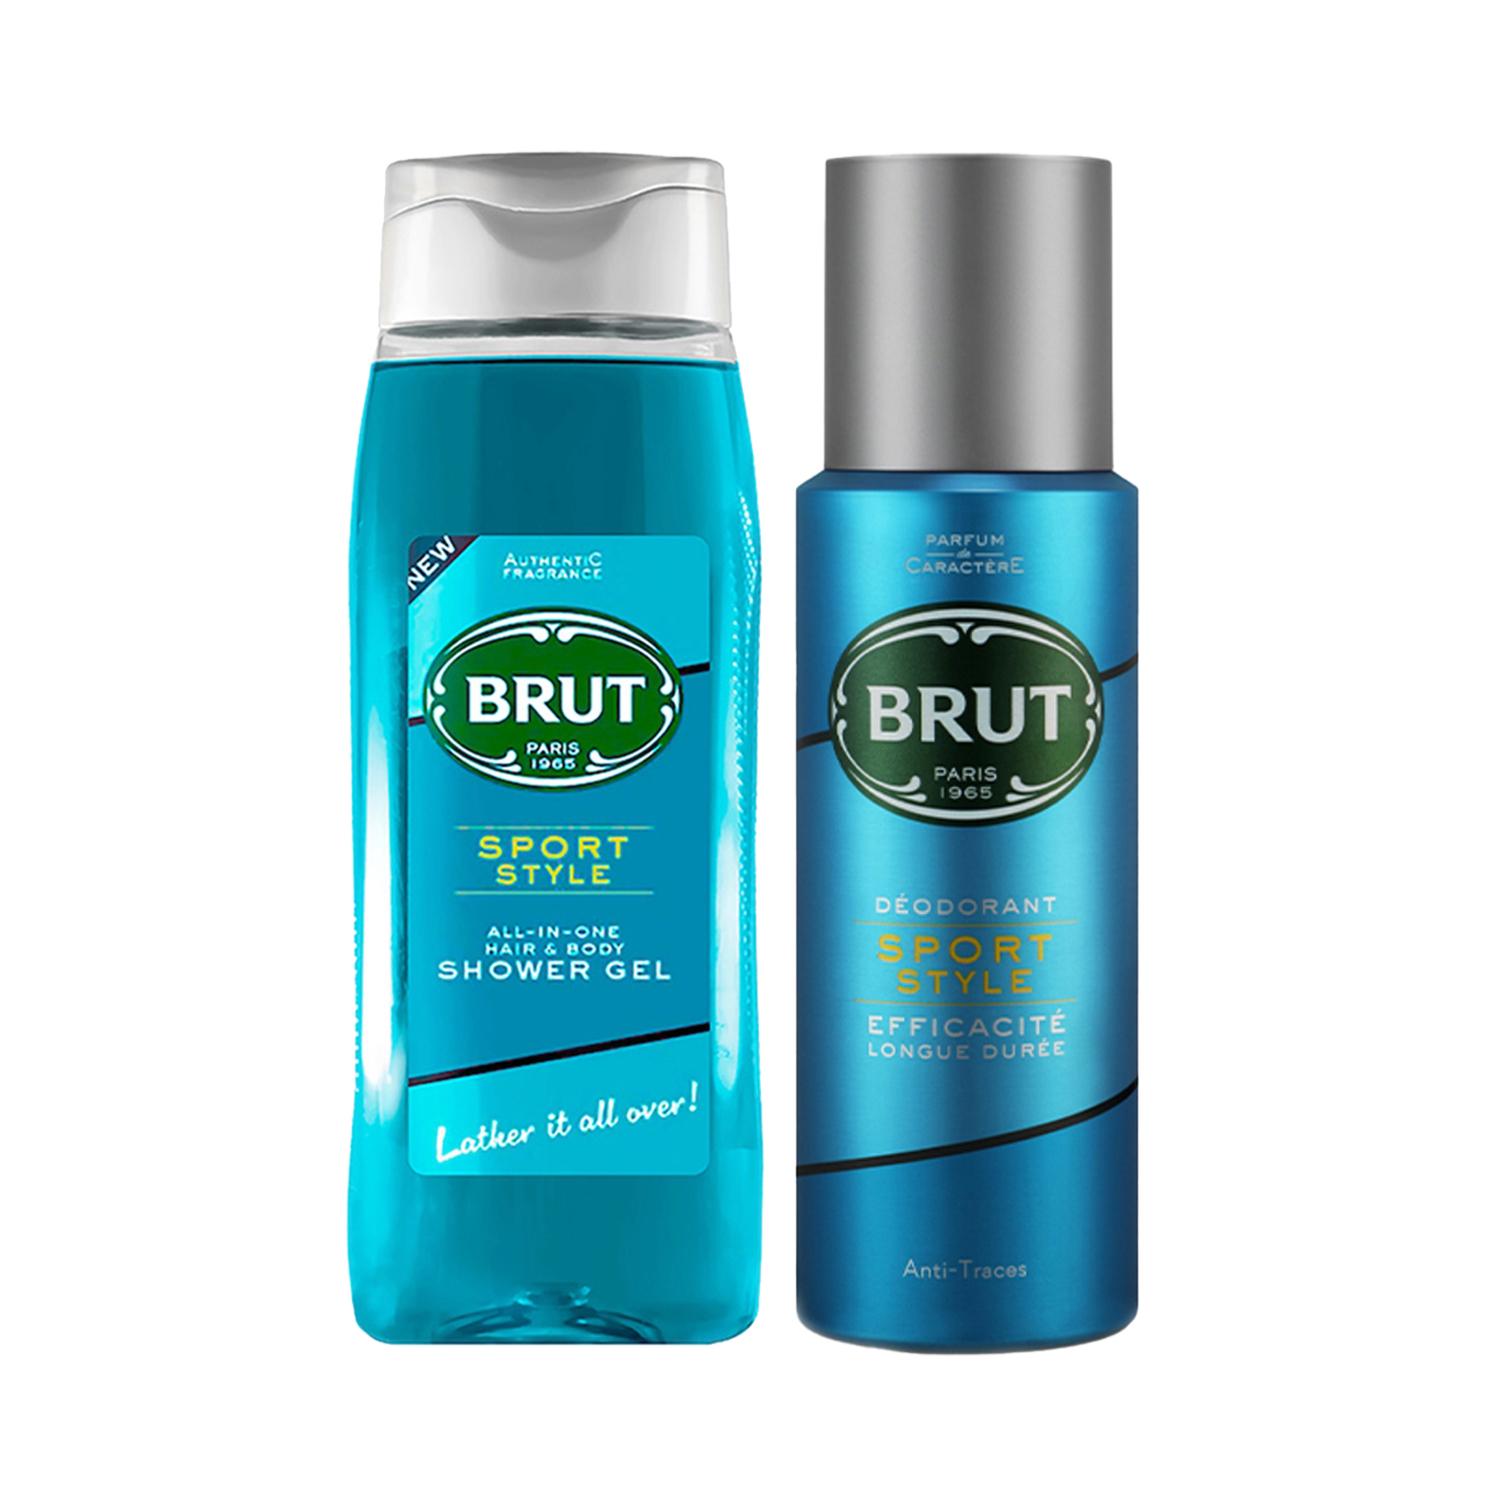 Brut | Brut Sport Style All-In-One Hair And Body Shower Gel (500ml) & Style Deodorant Spray (200ml) Combo